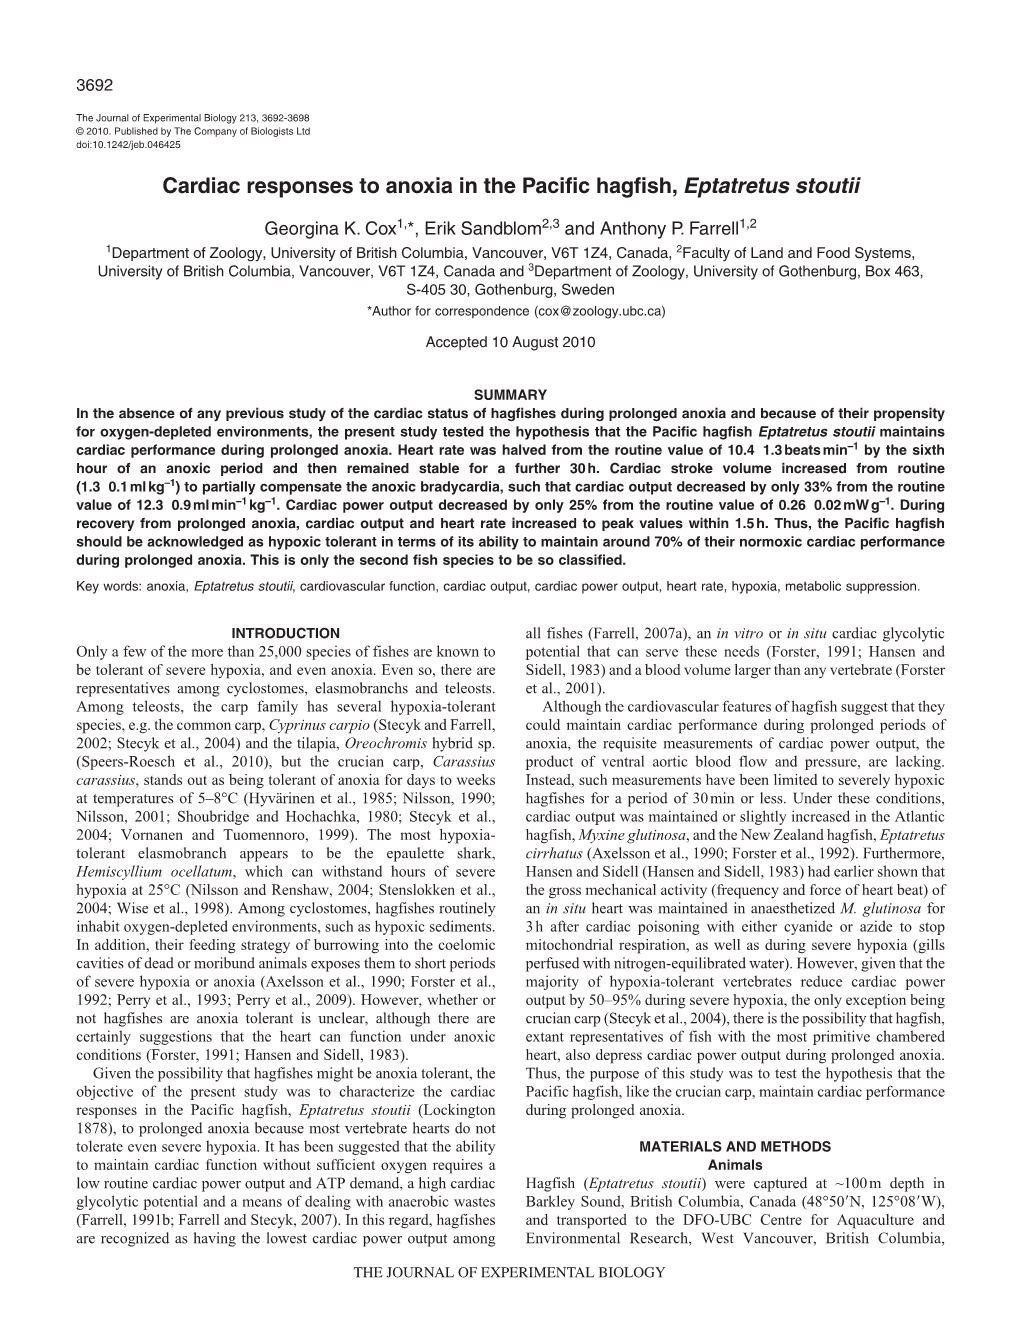 Cardiac Responses to Anoxia in the Pacific Hagfish, Eptatretus Stoutii